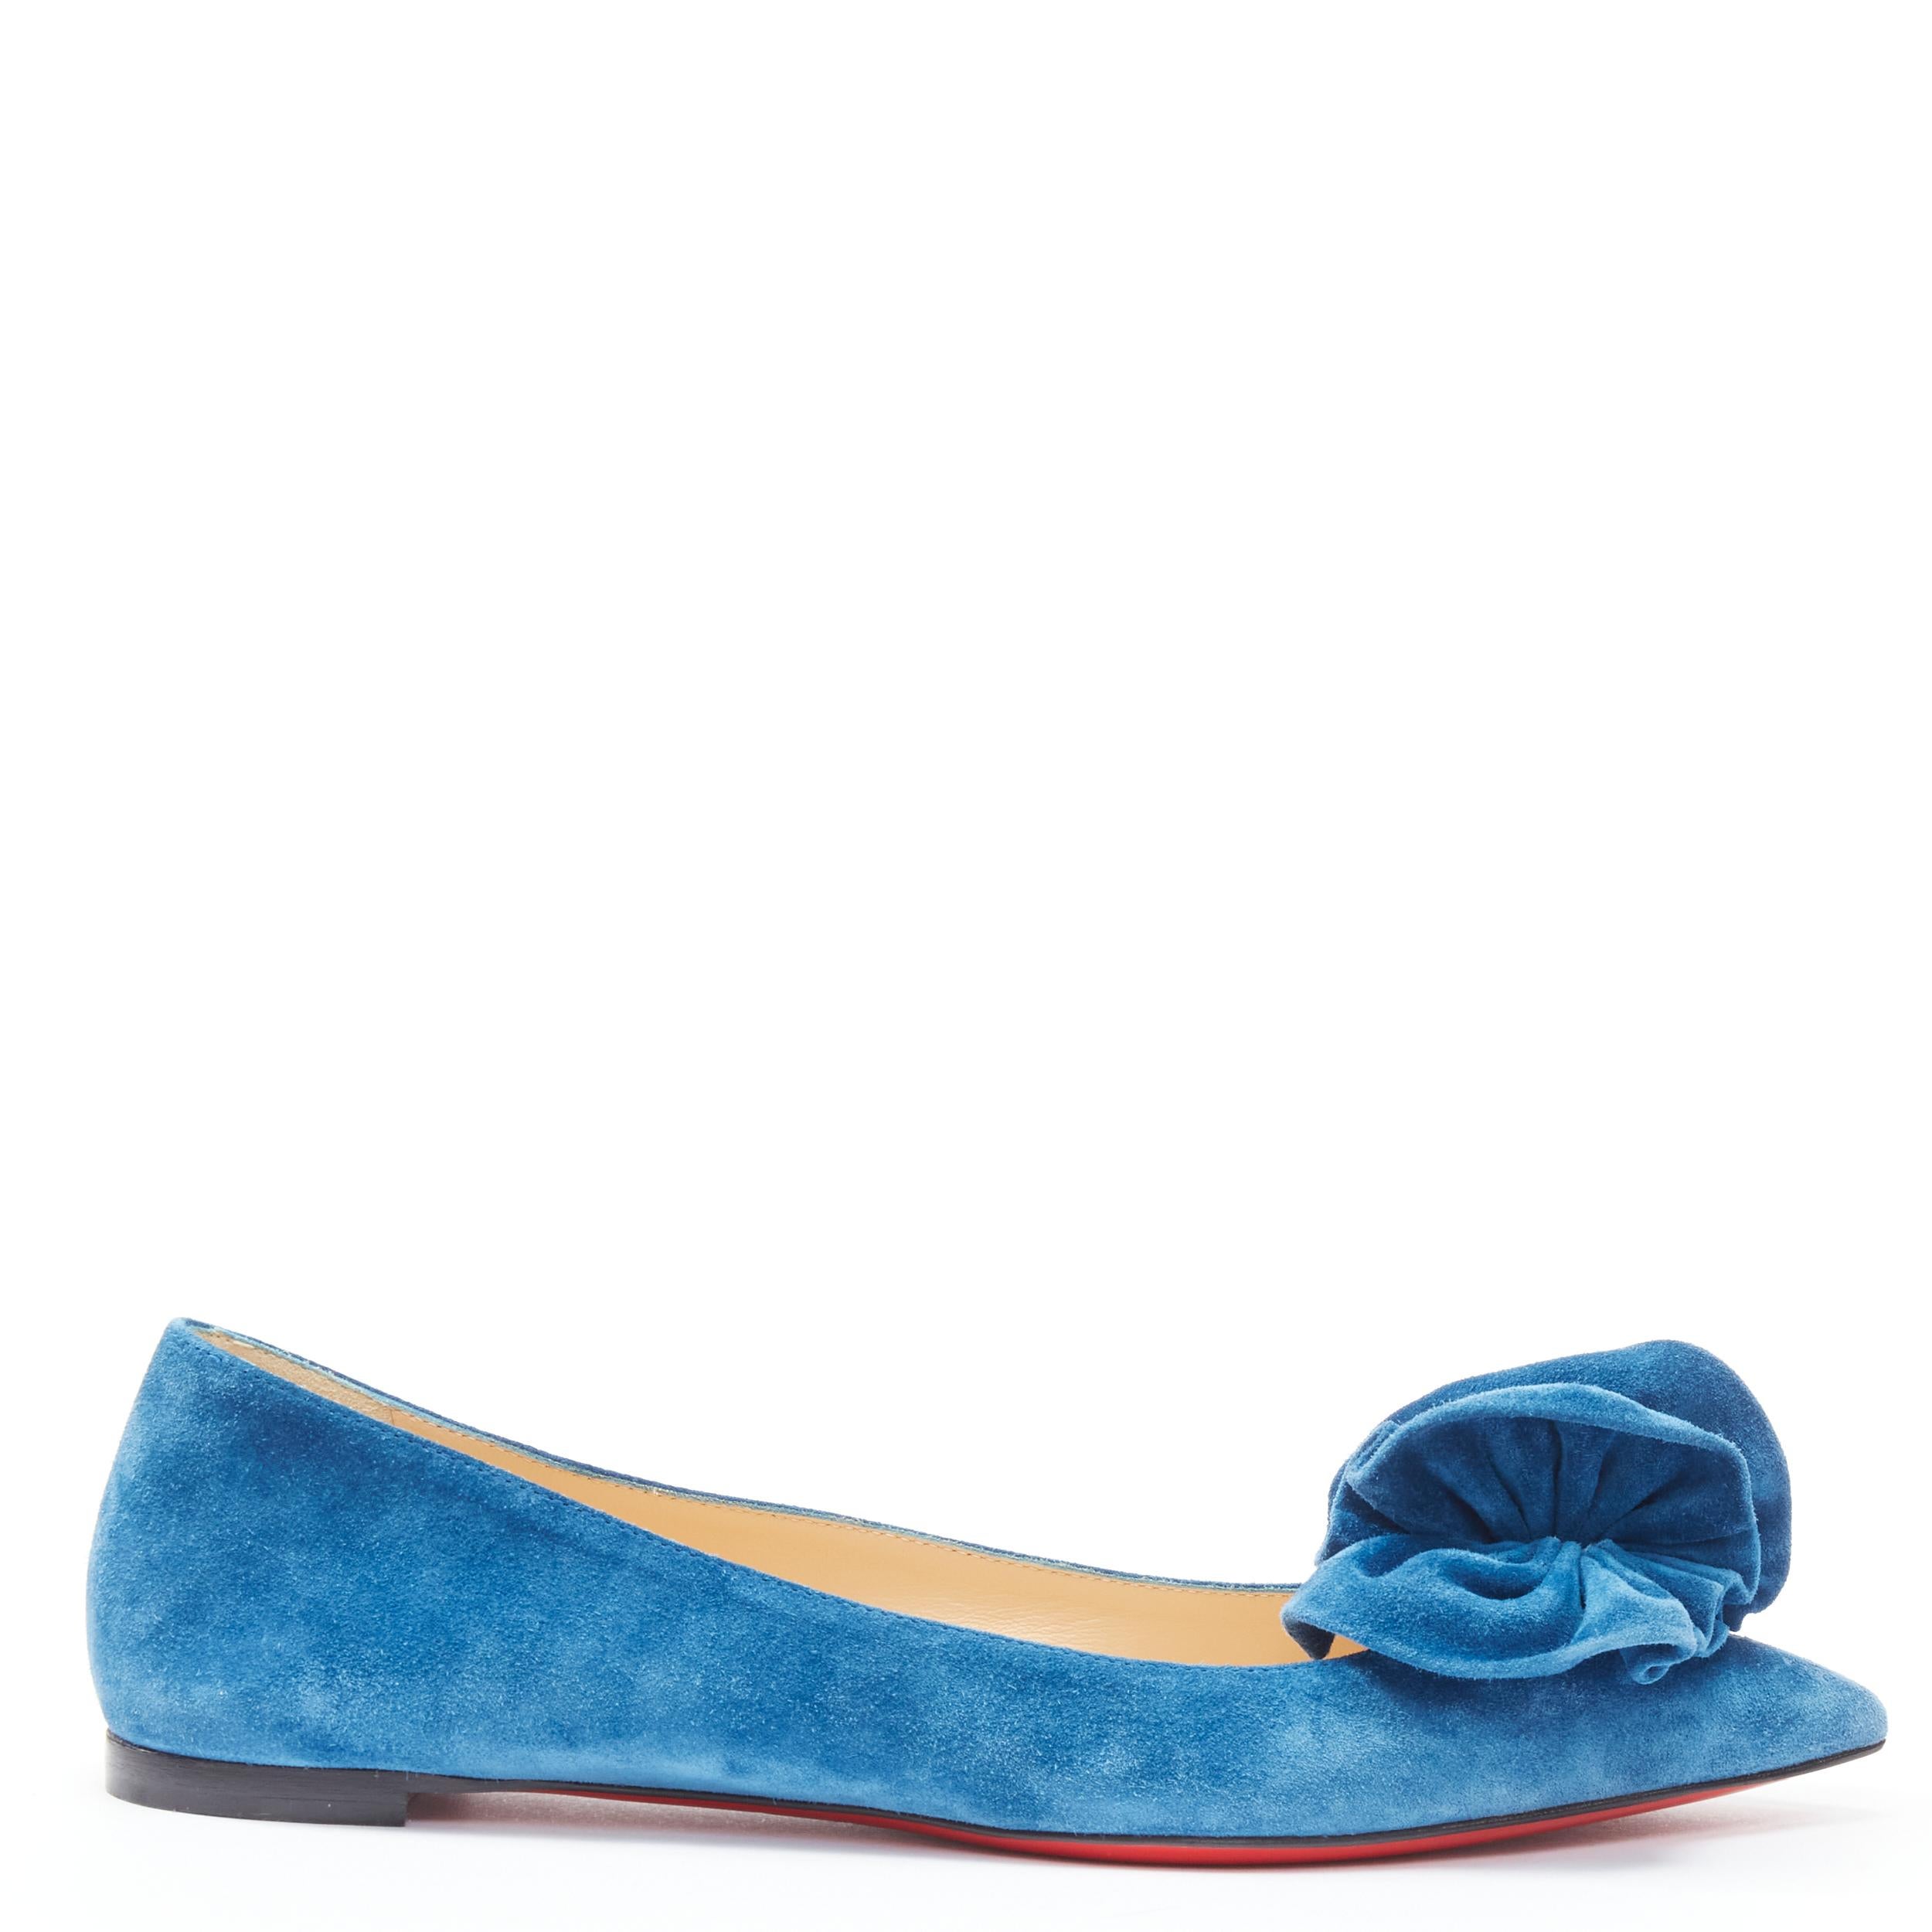 new CHRISTIAN LOUBOUTIN Anemosea blue suede scrunchie ruffle pointy flats EU37.5 Reference: TGAS/B01810 
Brand: Christian Louboutin 
Designer: Christian Louboutin 
Model: Anemosea suede flats 
Material: Suede 
Color: Blue 
Pattern: Solid 
Extra